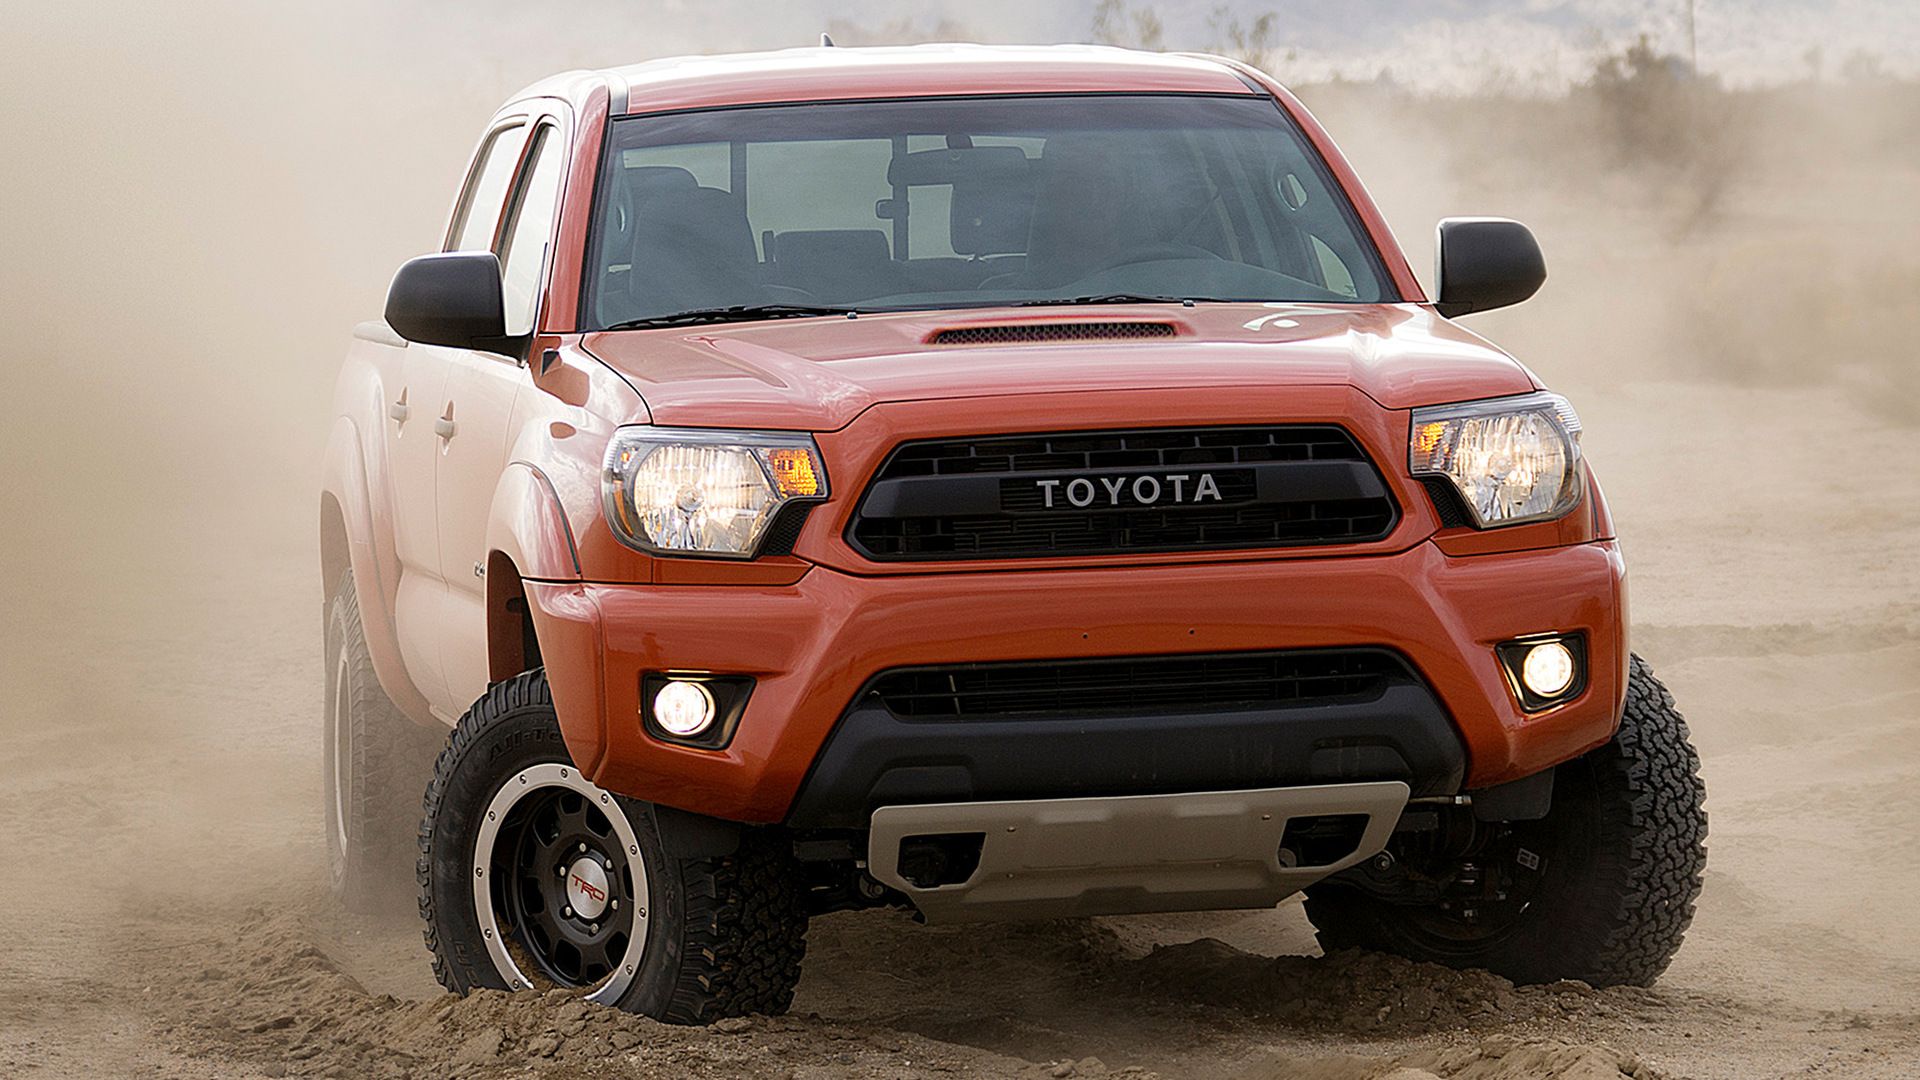 Toyota Tacoma TRD Pro Double Cab (2015) Wallpapers and HD Images